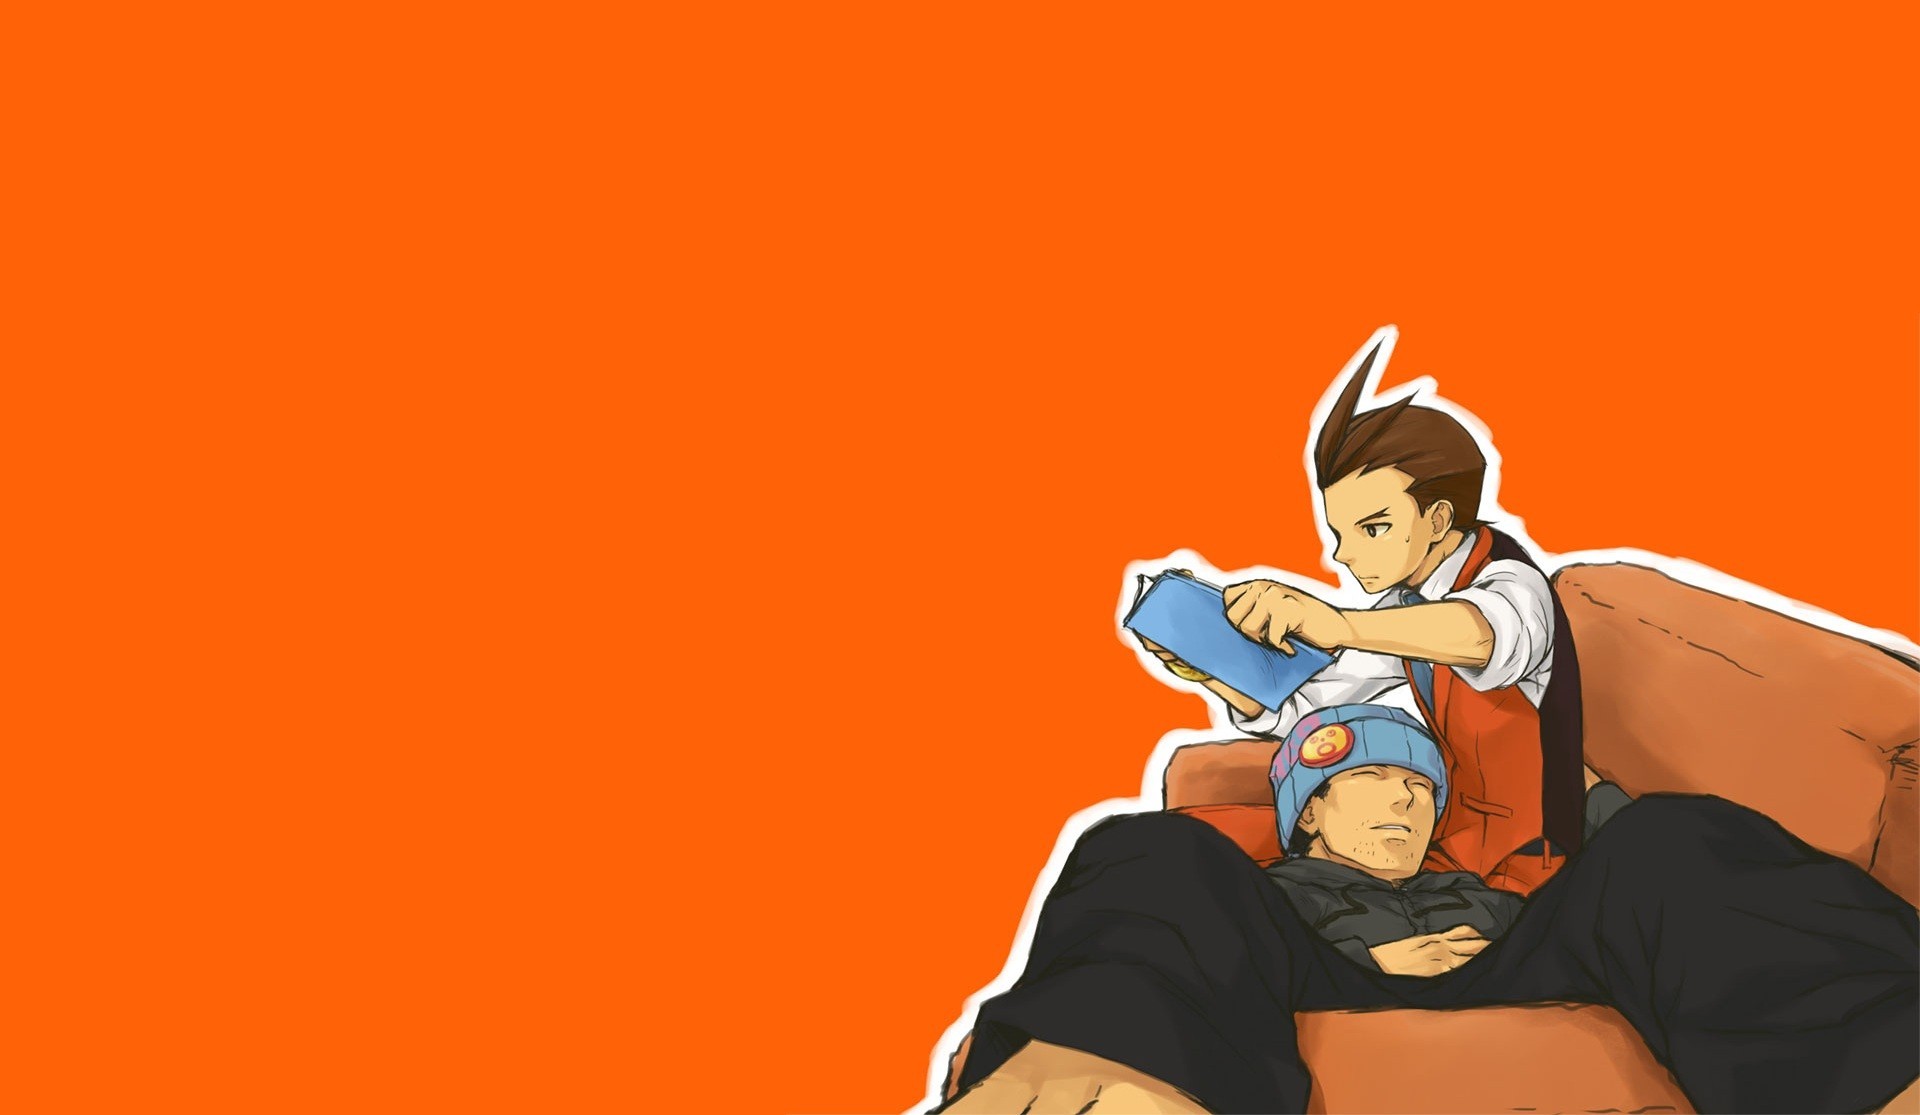 1920x1115 Video Game - Phoenix Wright: Ace Attorney Wallpaper